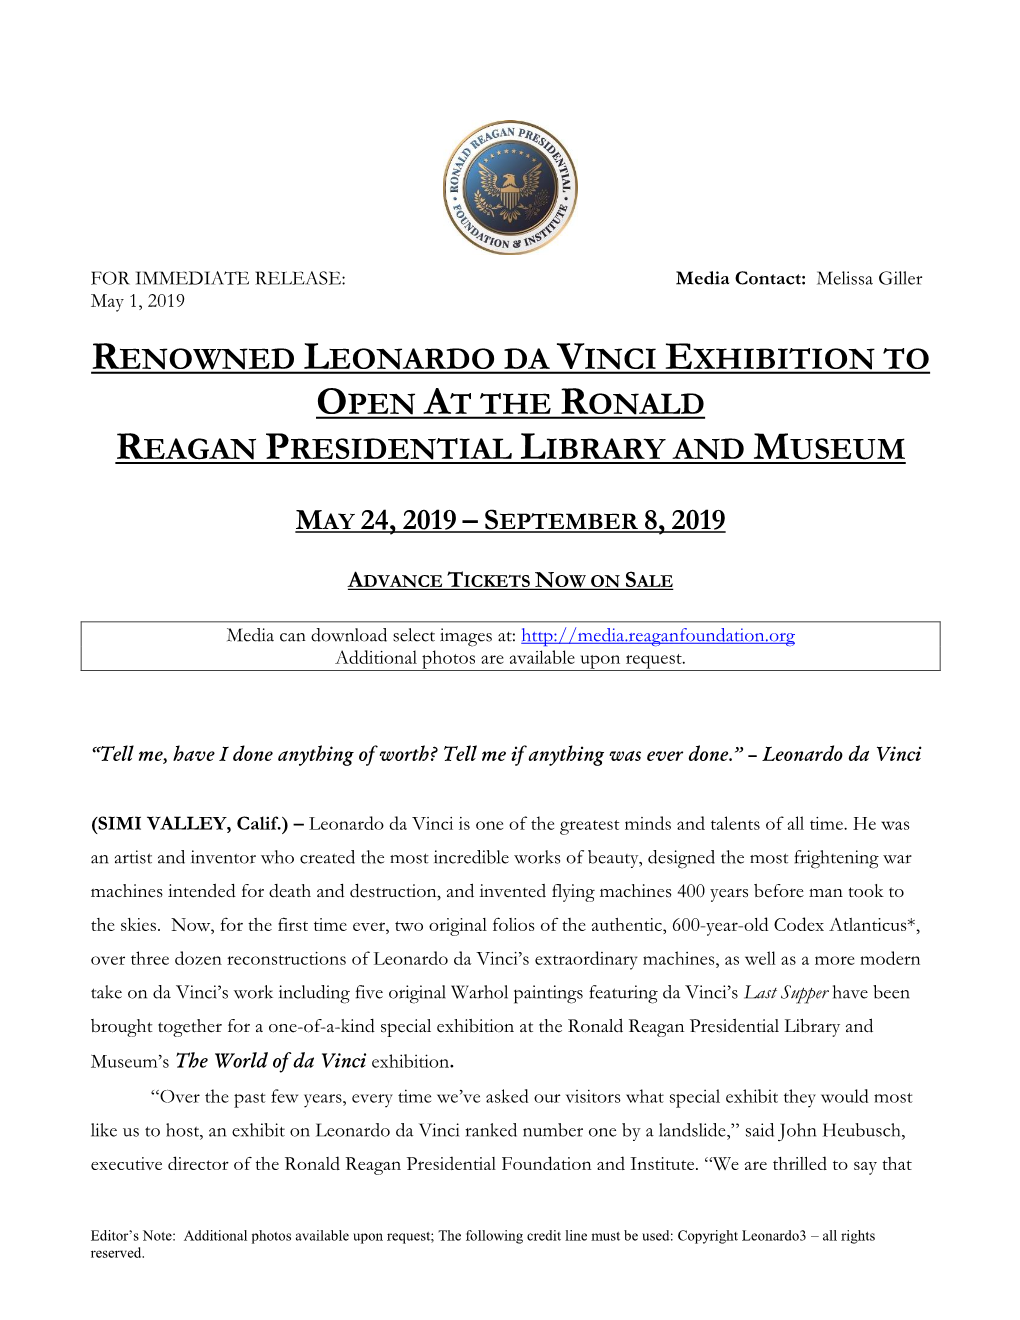 Renowned Leonardo Da Vinci Exhibition to Open at the Ronald Reagan Presidential Library and Museum